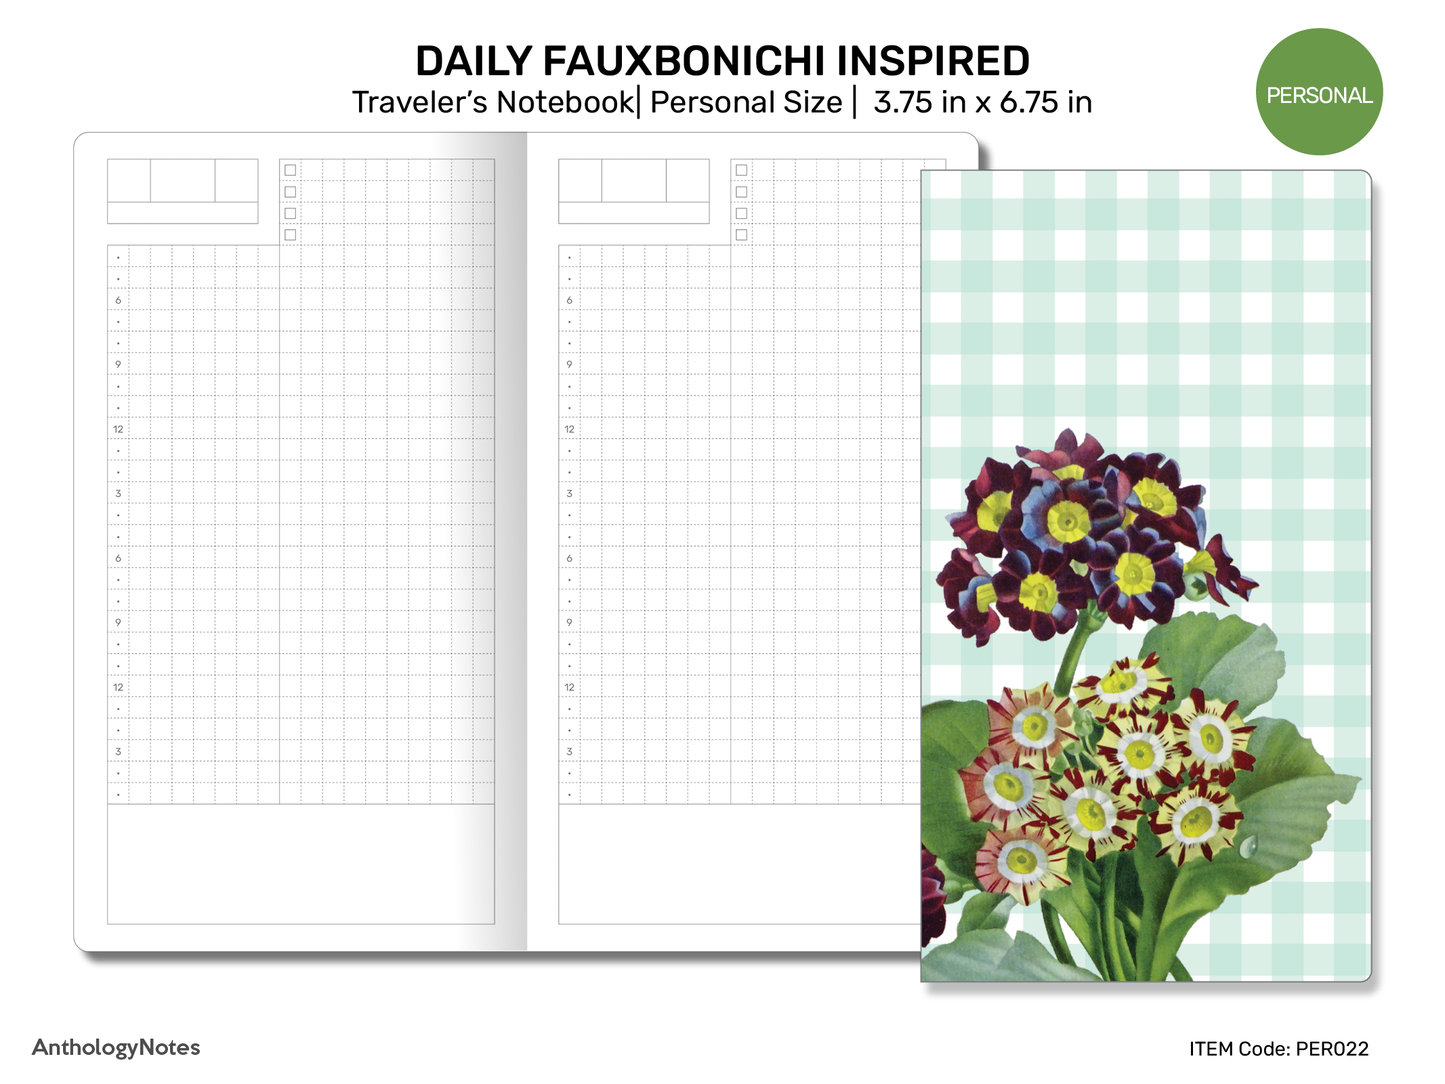 TN Personal Size Hobonichi Inspired Daily View Traveler's Notebook Printable Insert - GRID Minimalist Undated